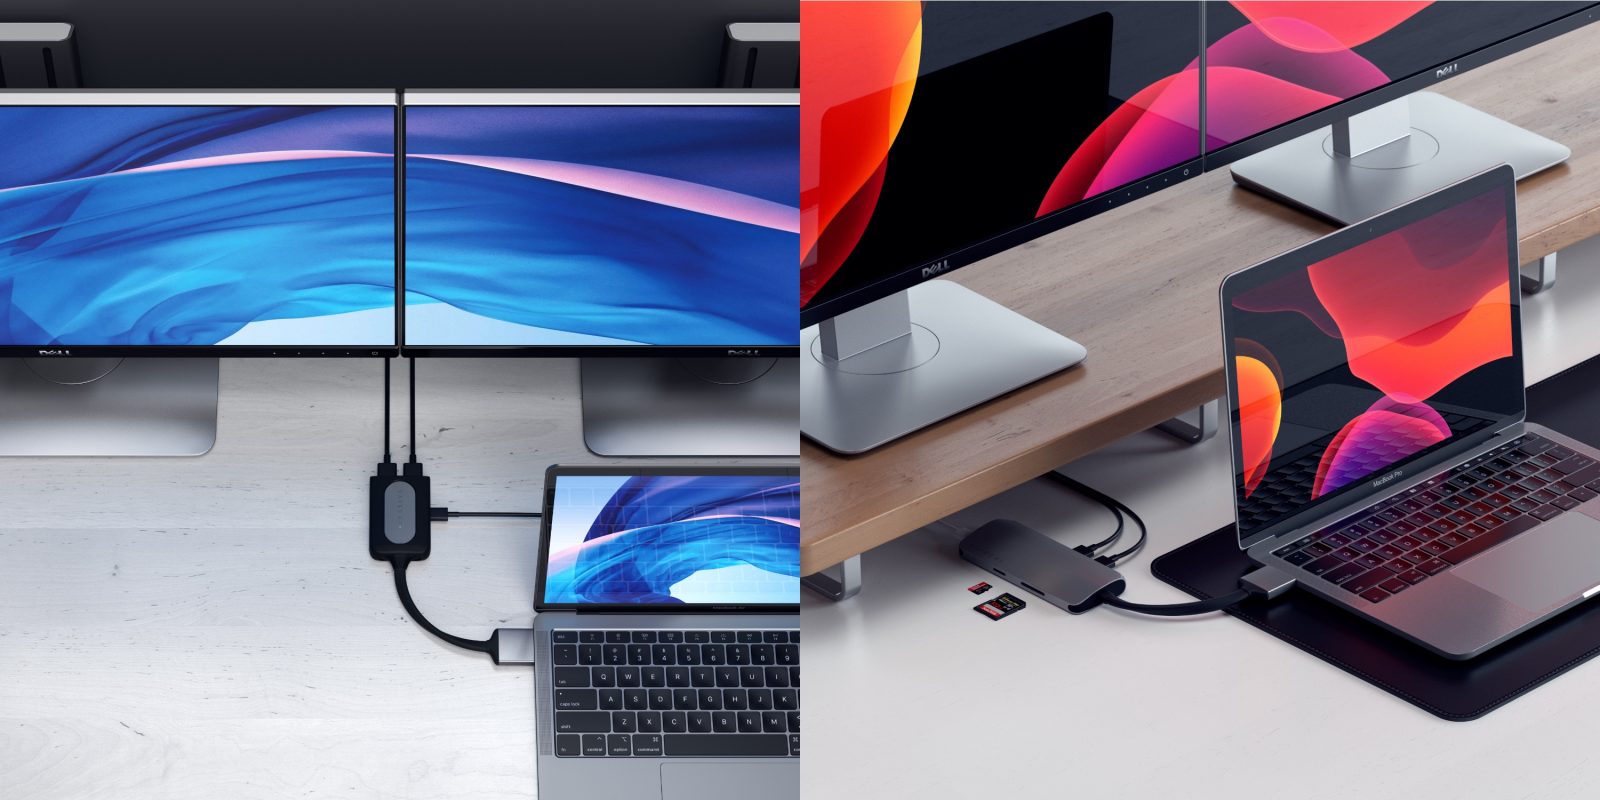 Satechi Launches Usb C Dual Multimedia Adapter With 4k At 60hz Ethernet More For Macbooks 9to5mac